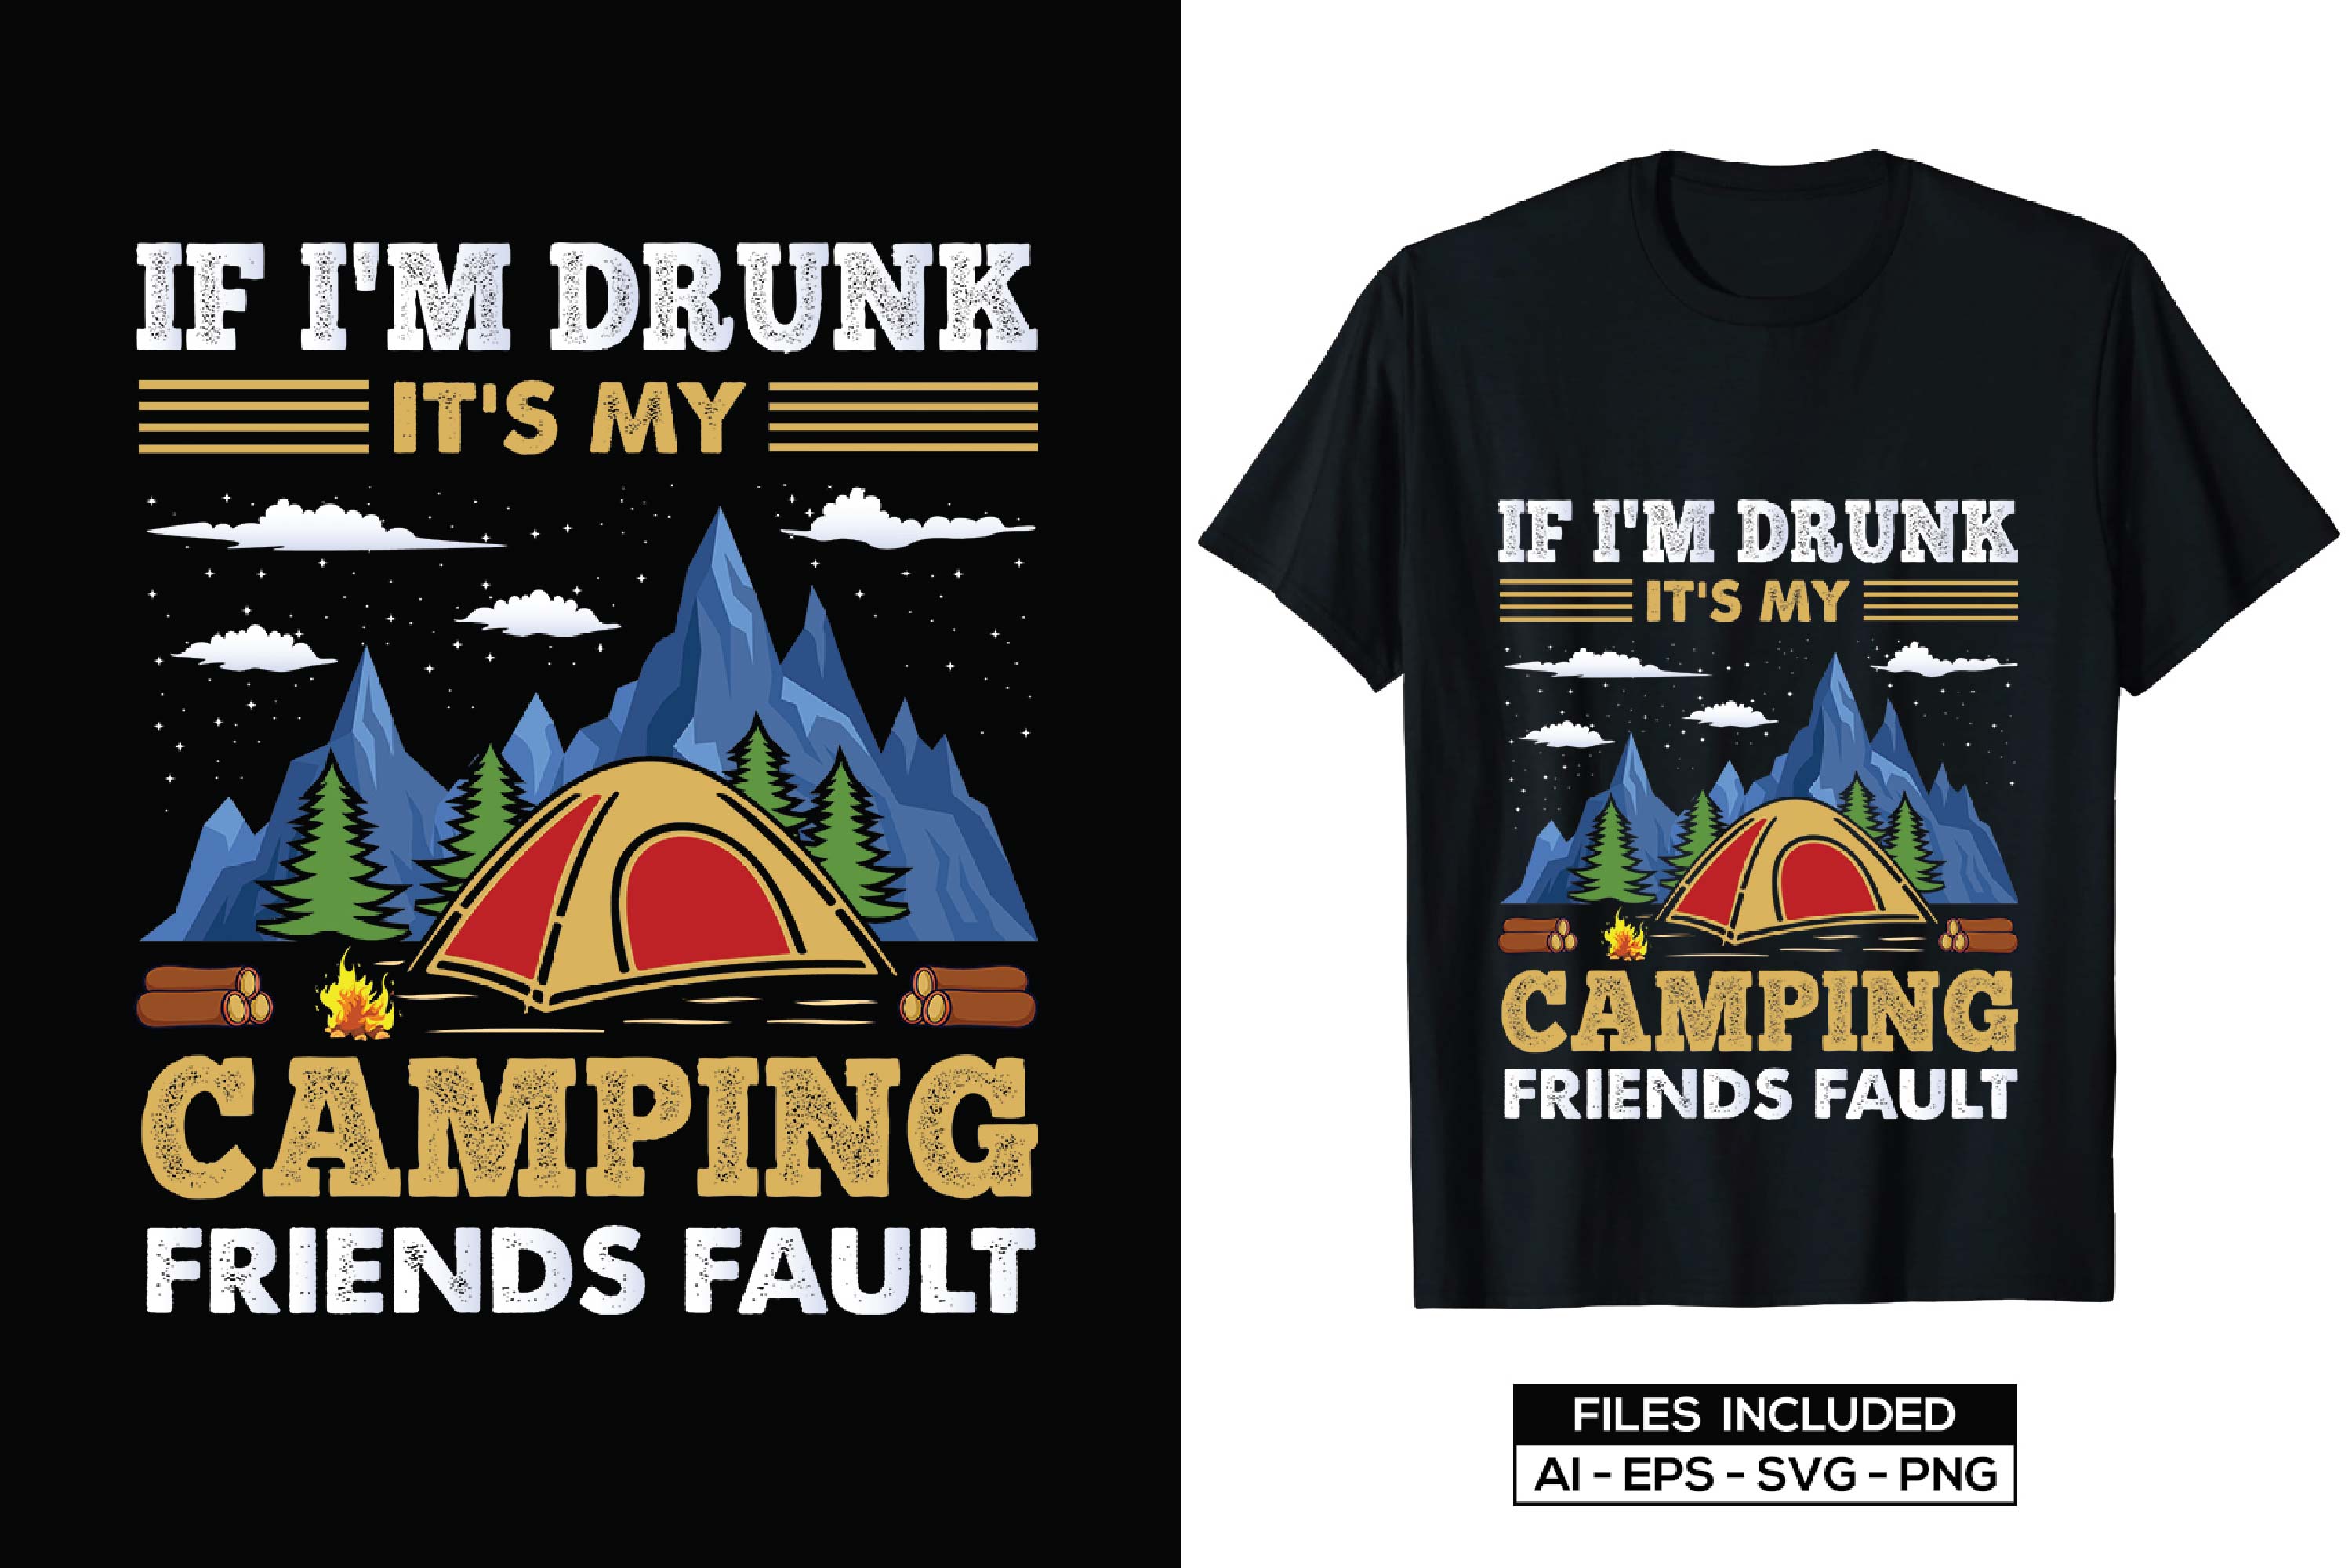 Image of a black t-shirt with a colorful camping theme print.